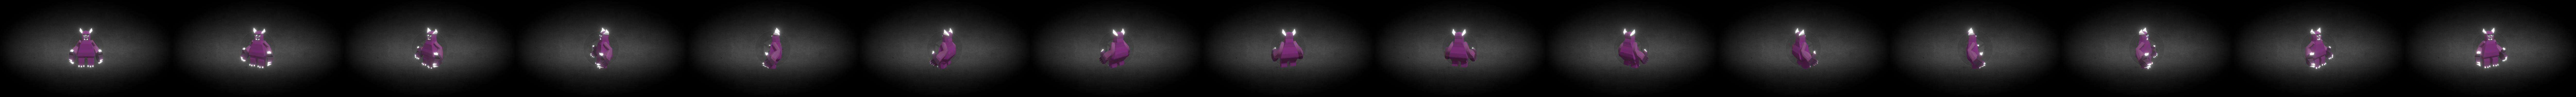 Müllsack Low-Poly 3D-Modell #237499 - TemplateMonster